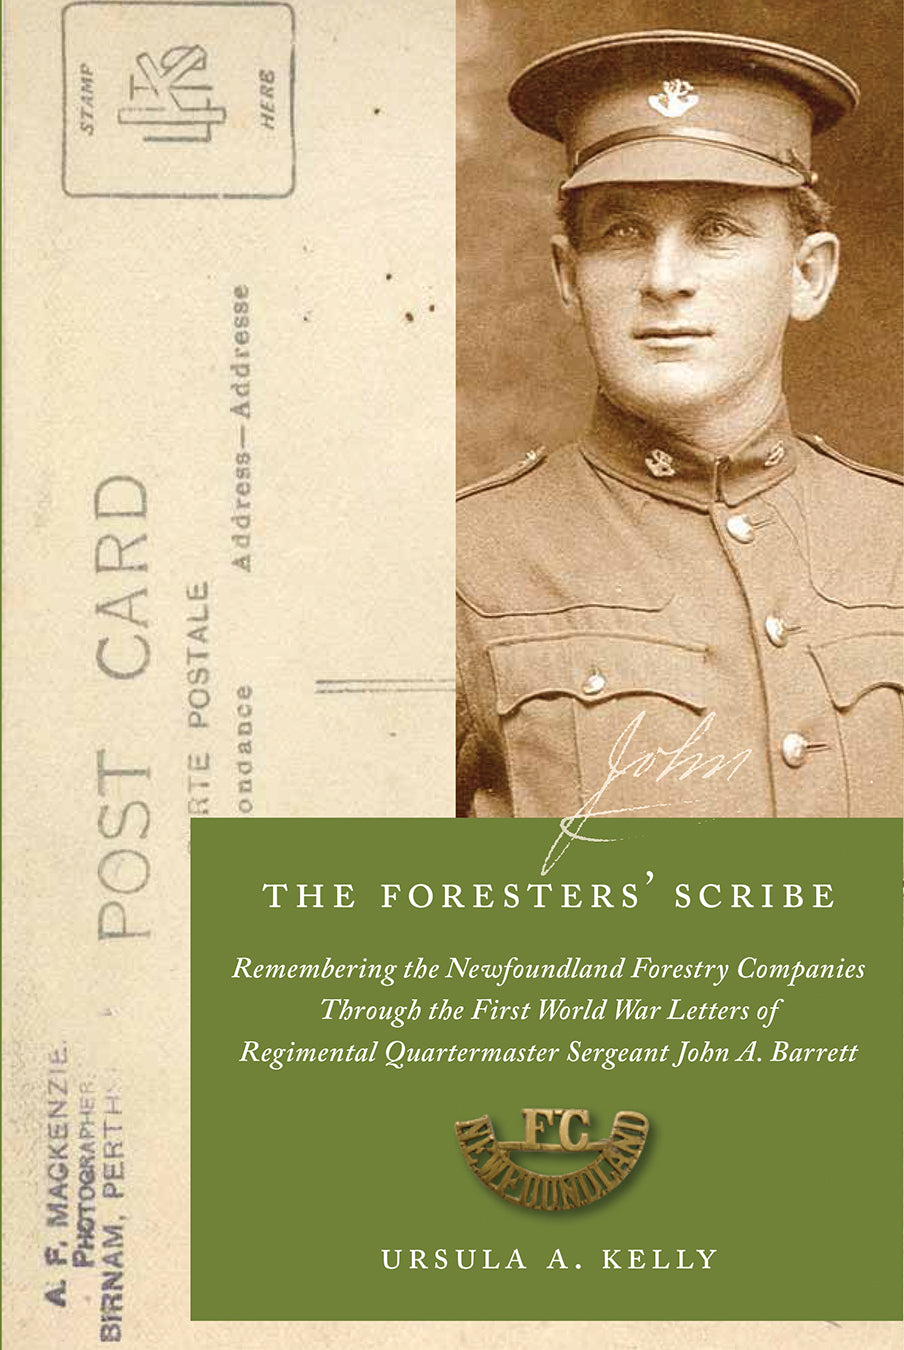 Foresters' Scribe, The: Remembering the Newfoundland Forestry Companies through the First World War letters of Regimental Quartermaster Sergeant John A. Barrett